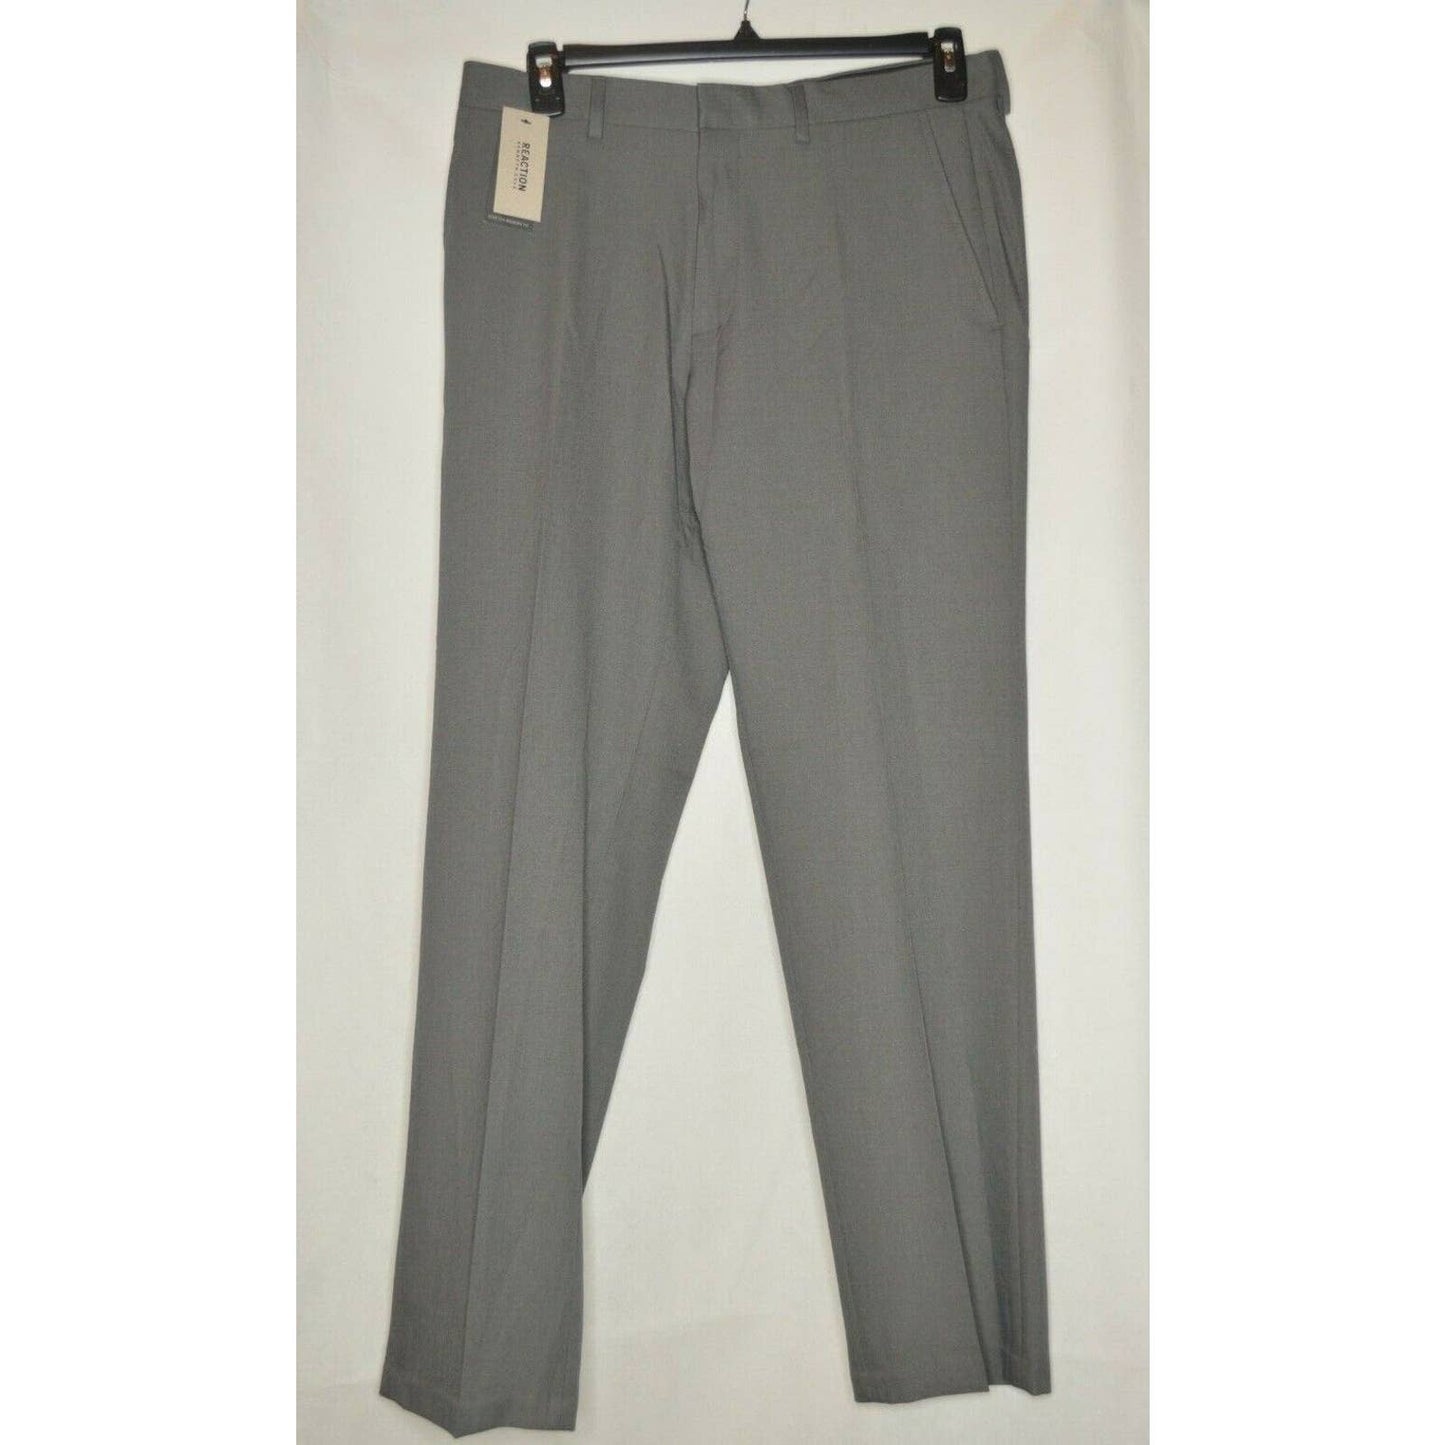 KENNETH COLE REACTION, Men's Heather Gray Stretch Dress Pants, Size 33W 32L, NWT